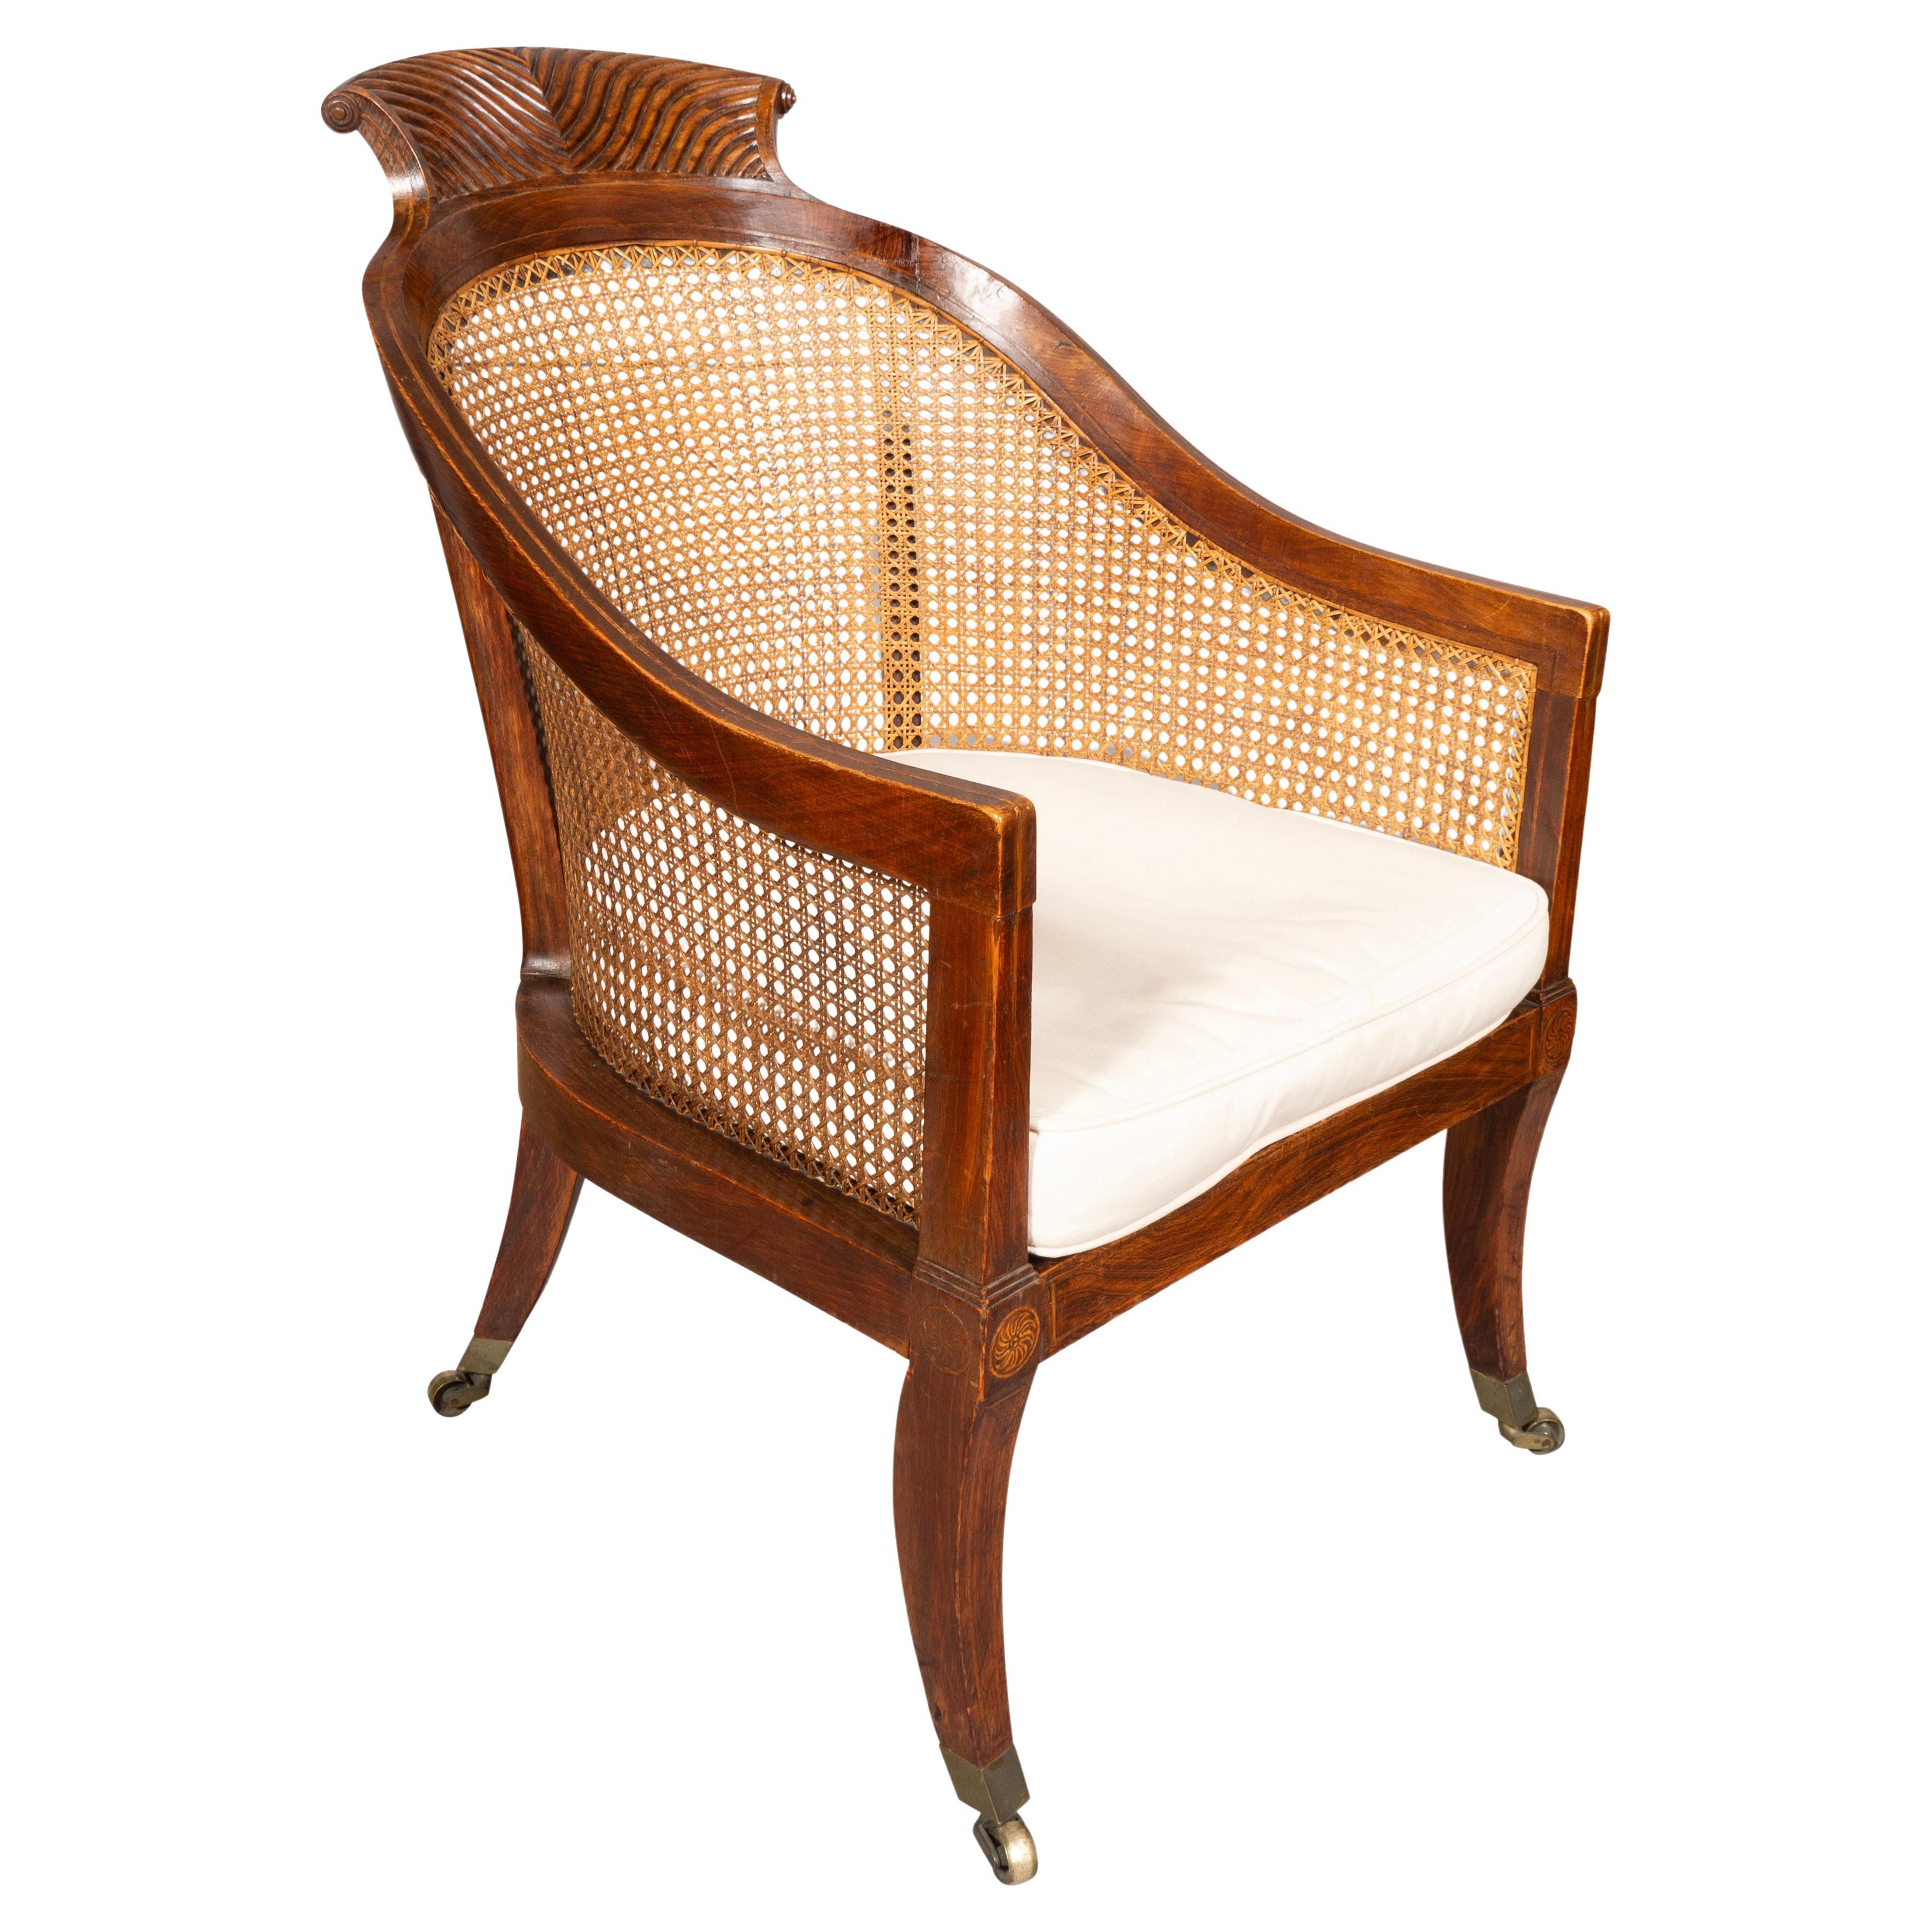 Regency Faux Rosewood Caned Tub Chair